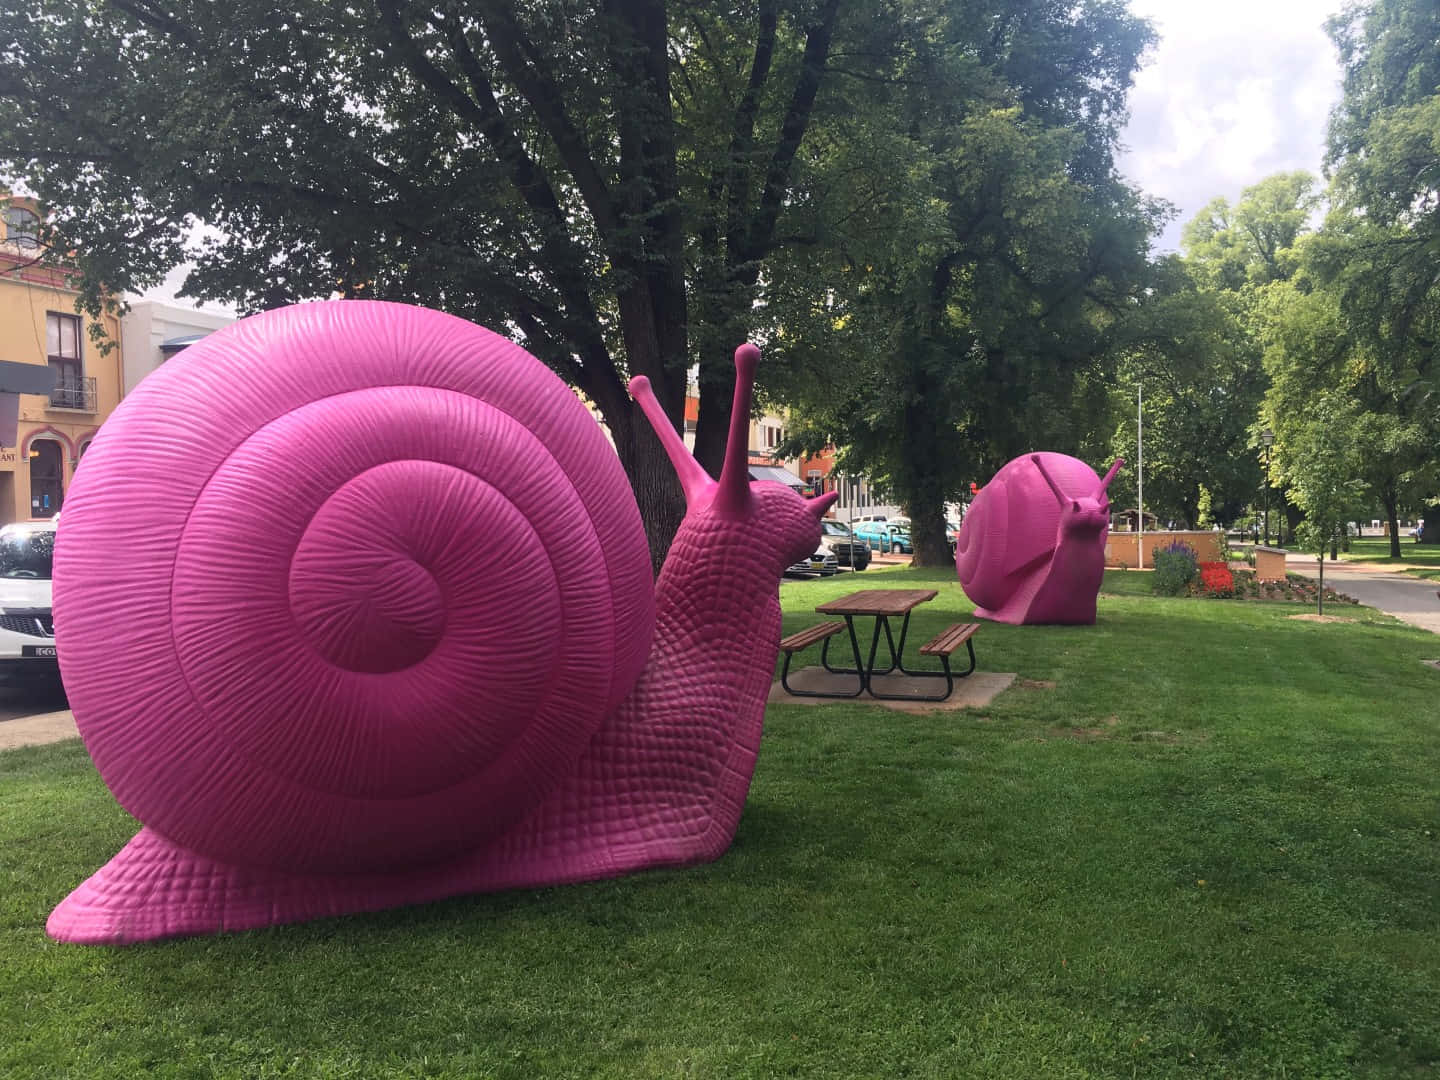 A Vibrant Pink Snail in Nature Wallpaper